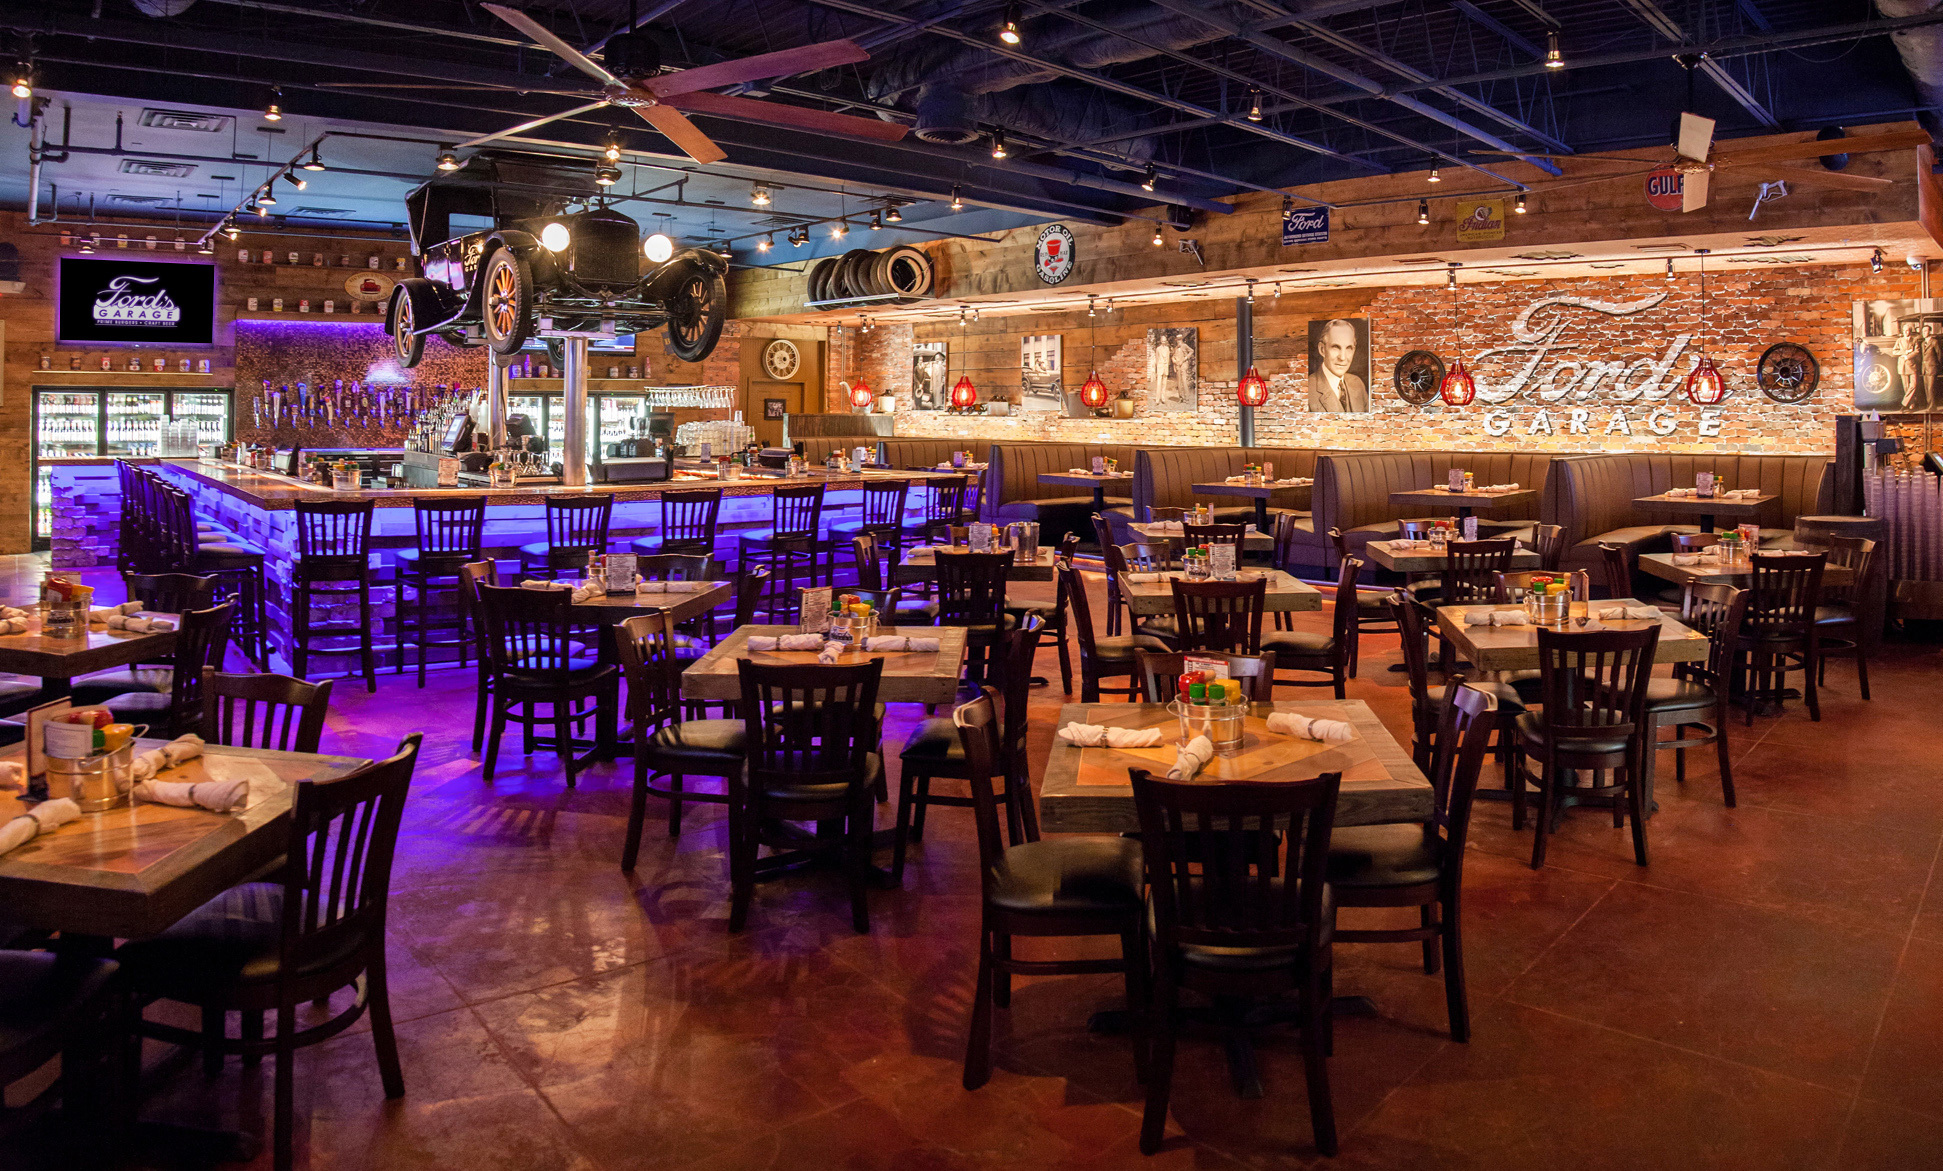 The dining area at Ford's Garage restaurant features vintage cars and decor.